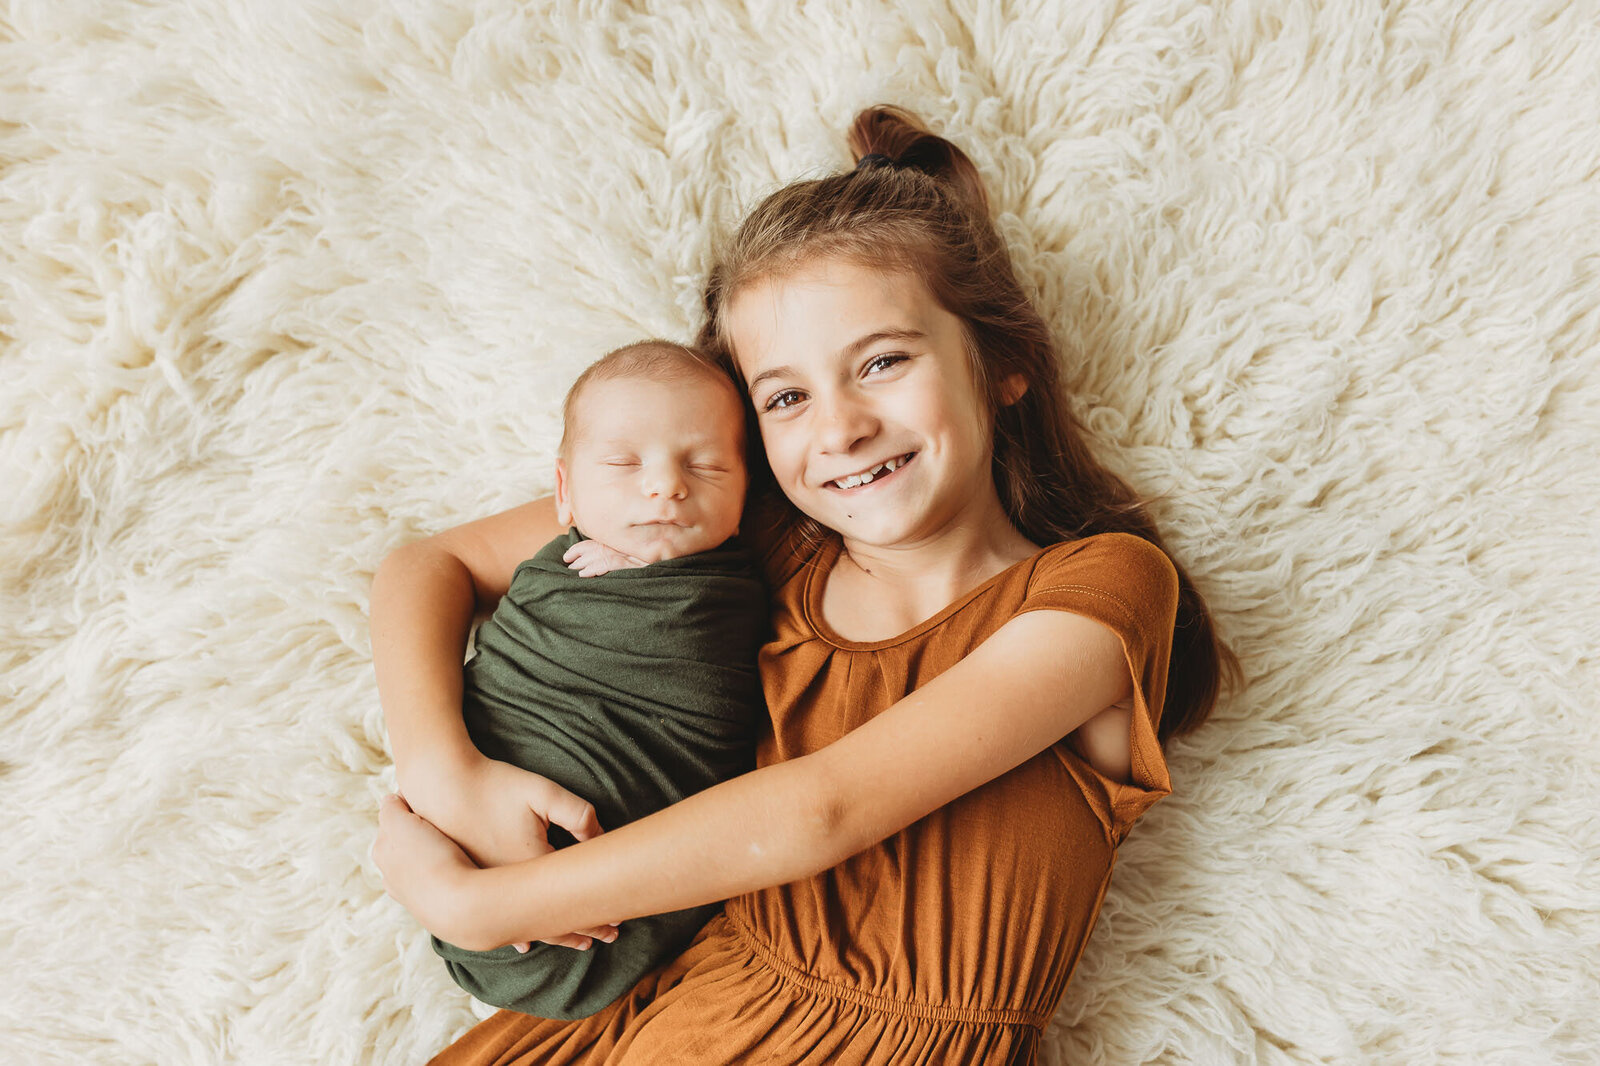 Big sibling holding baby brother who is swaddled laying on a fuzzy rug for newborn photos